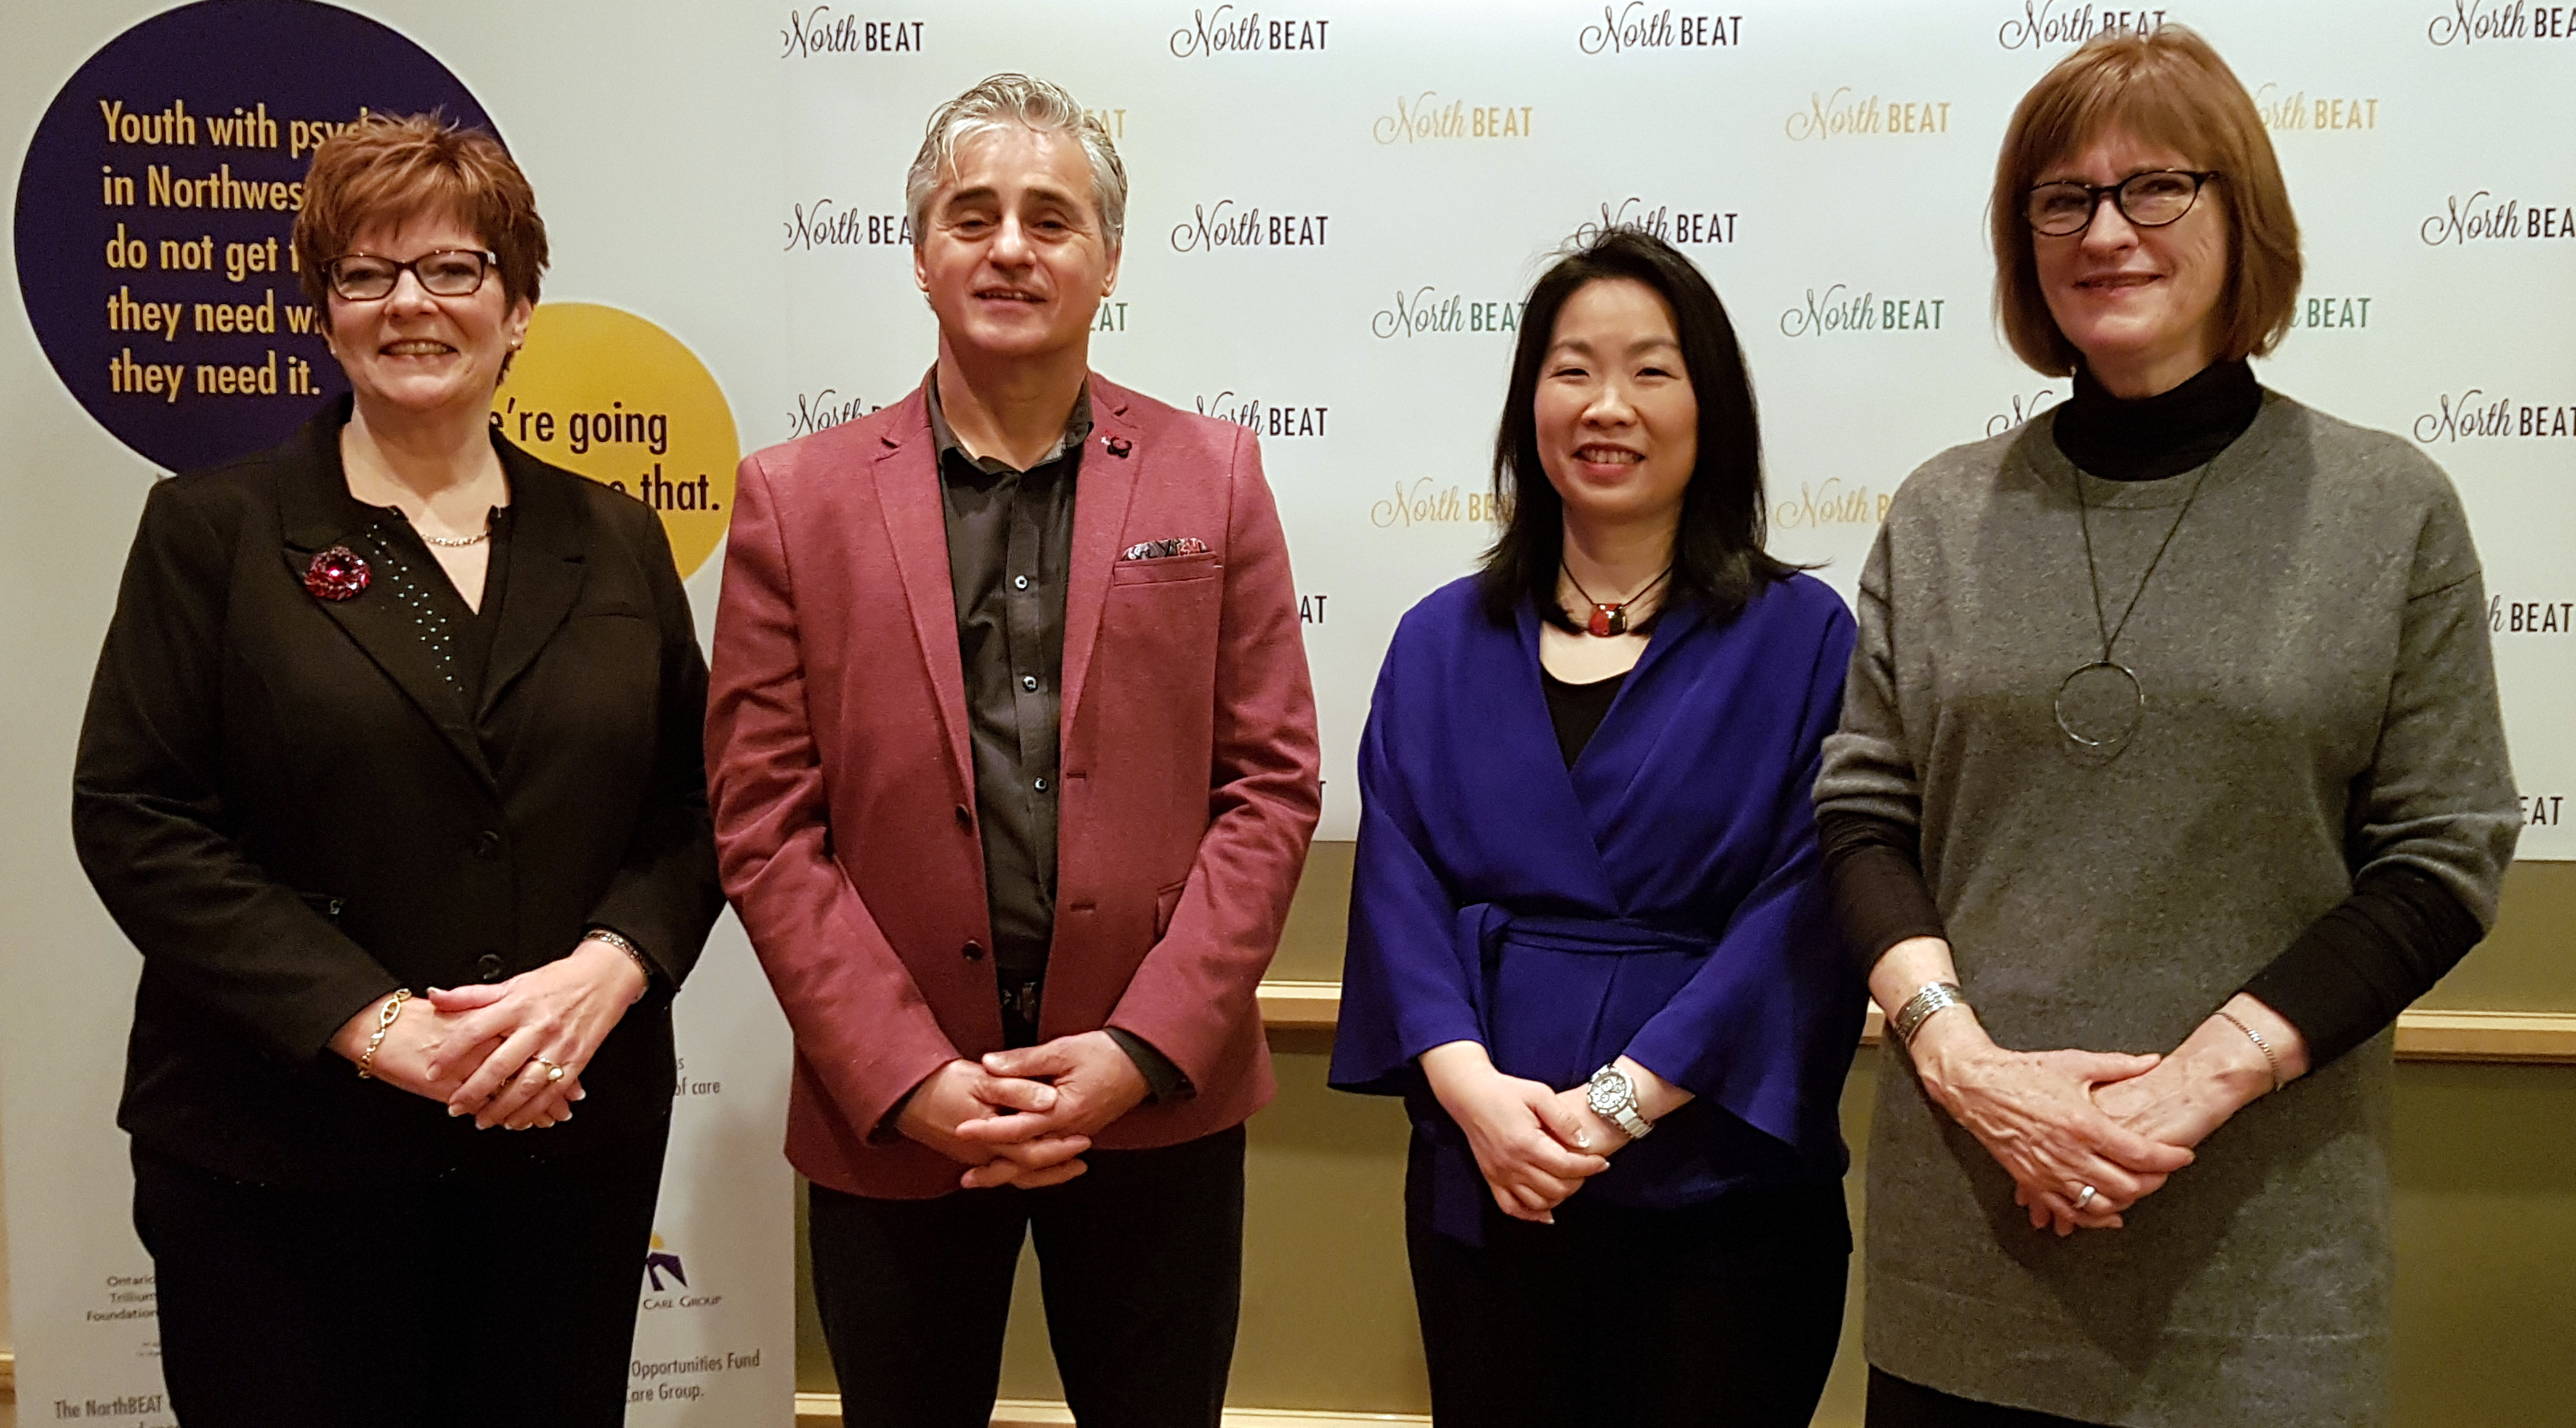 NorthBEAT Collaborative Media Launch, December 1, 2017: Left to Right: Myrna Holman, VP People Mission and Values at SJCG; Bill Mauro, MPP for Thunder Bay-Atikokan; Dr. Chi Cheng, NorthBEAT Project Lead; Lesley Bell, Ontario Trillium Foundation Youth Opportunities Fund)